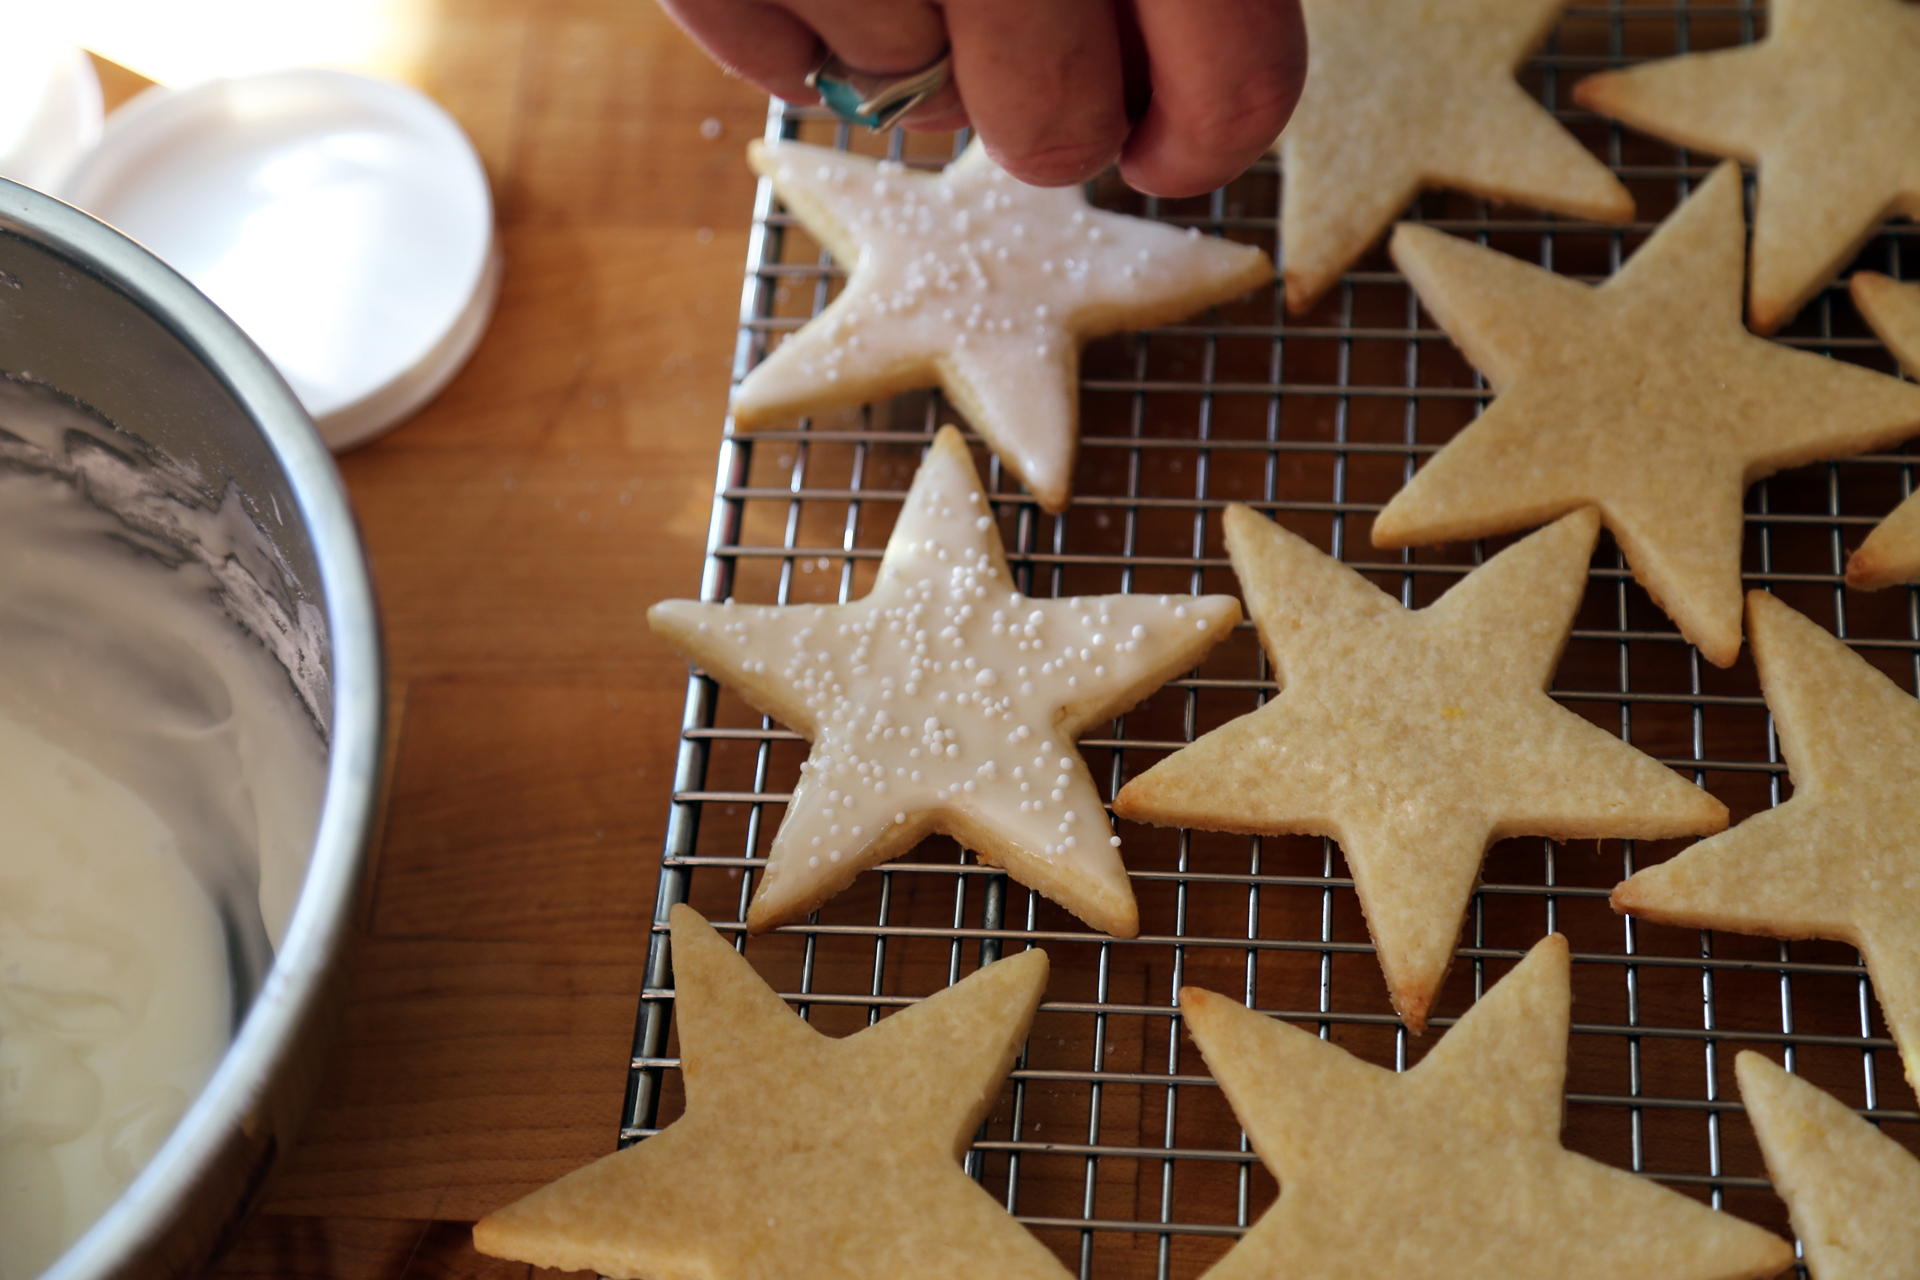 Sprinkle the lemon stars with a little sparkle sugar before the icing dries.